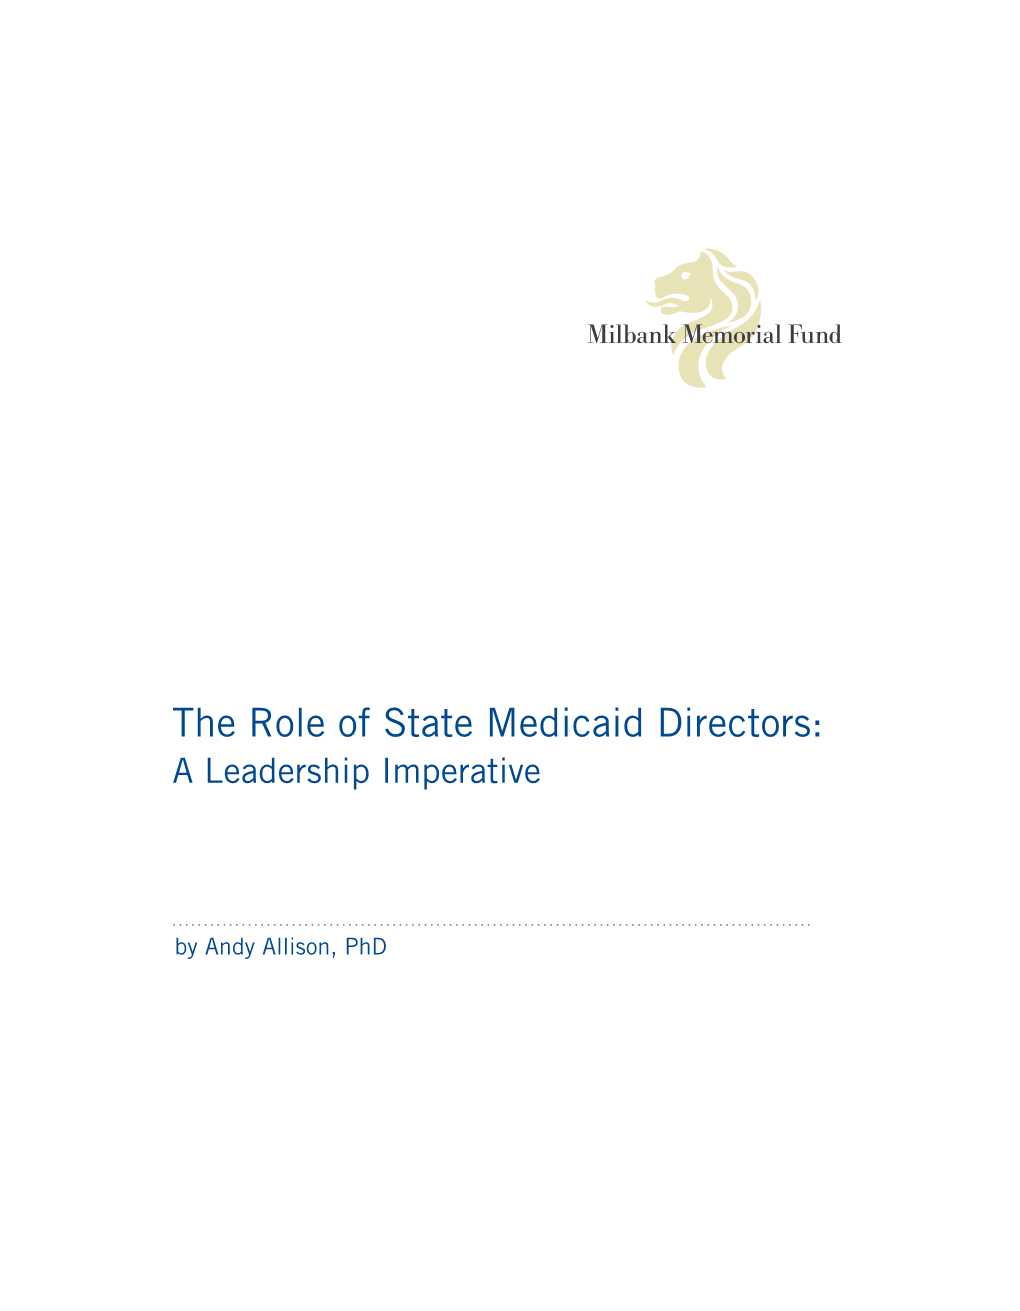 The Role of State Medicaid Directors: a Leadership Imperative